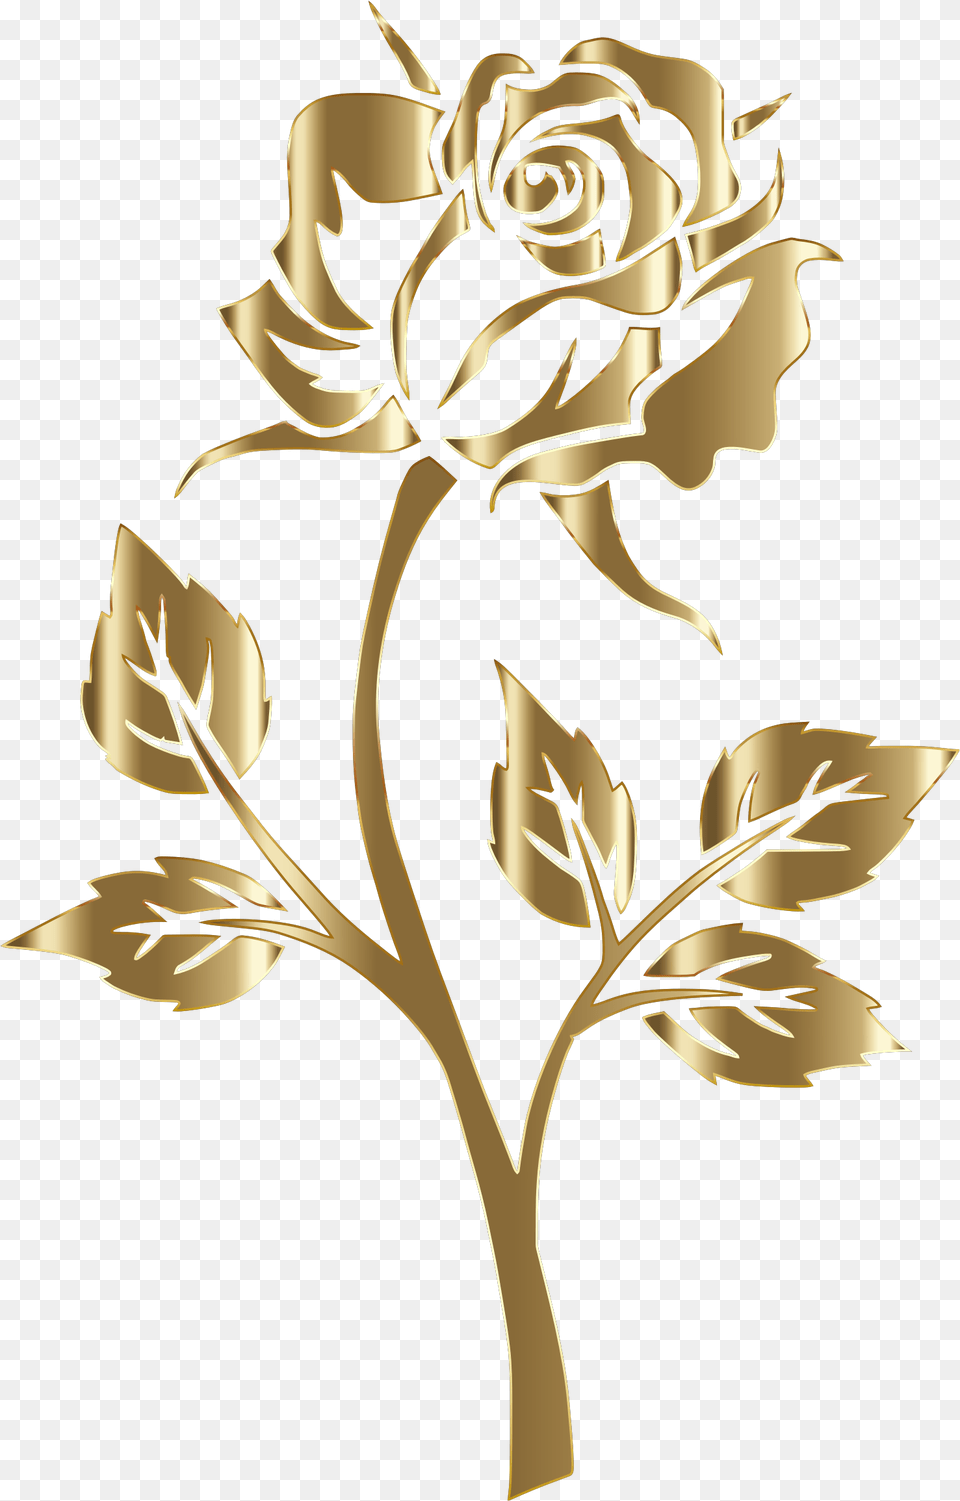 Copper Rose Silhouette No Background Clip Arts Red Rose Beauty And The Beast, Art, Floral Design, Graphics, Pattern Free Transparent Png